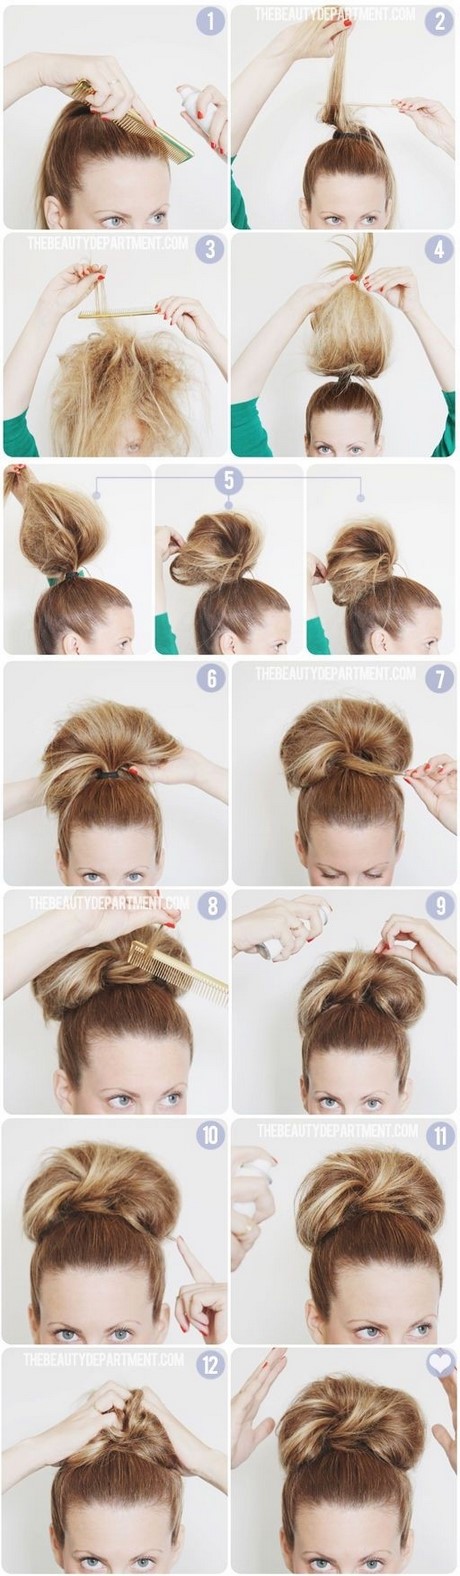 Easy put up hairstyles for long hair easy-put-up-hairstyles-for-long-hair-27_17